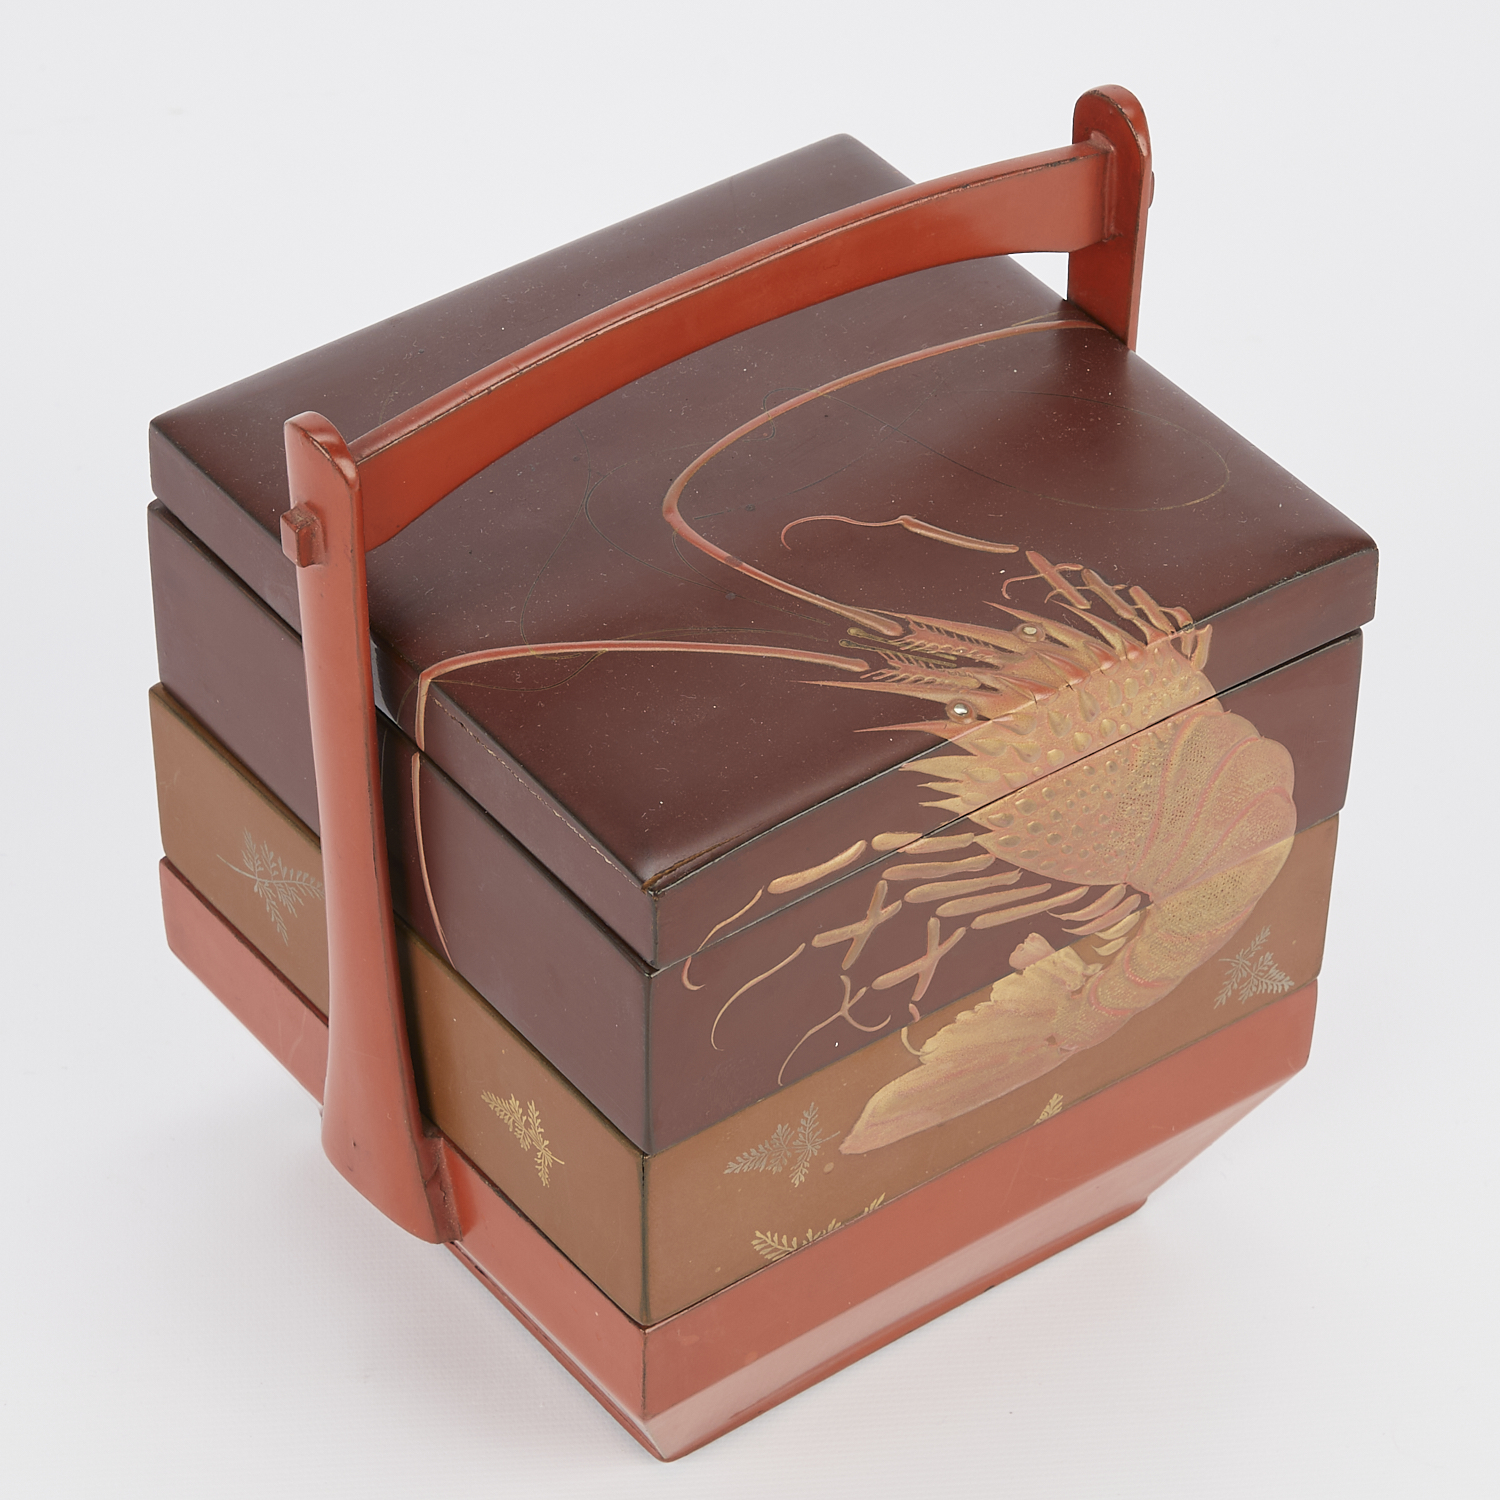 2 Japanese Lacquerware Boxes w/ Crustaceans - Image 12 of 17